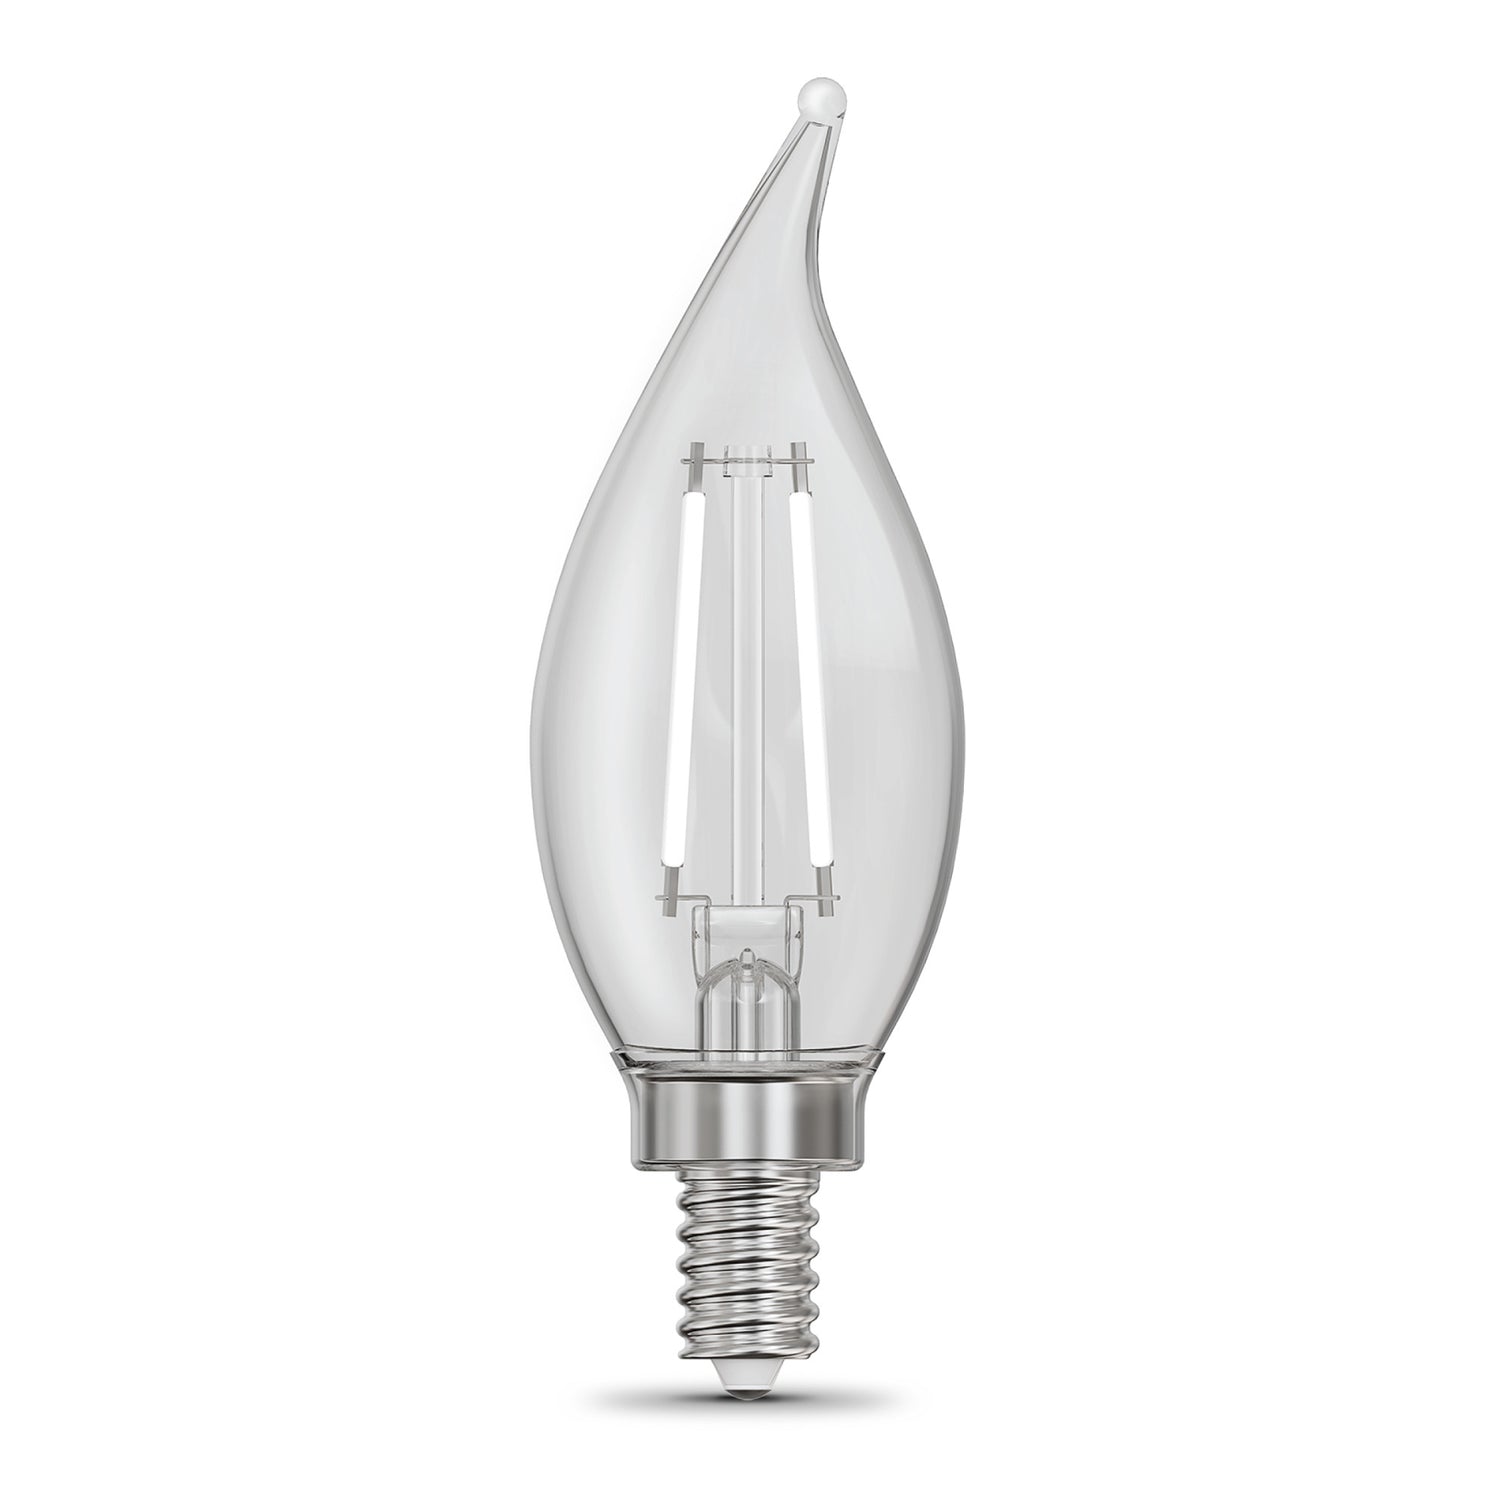 2.2W (25W Replacement) Daylight (5000K) E12 Base BA10 Flame Tip White Filament LED Bulb (3-Pack)